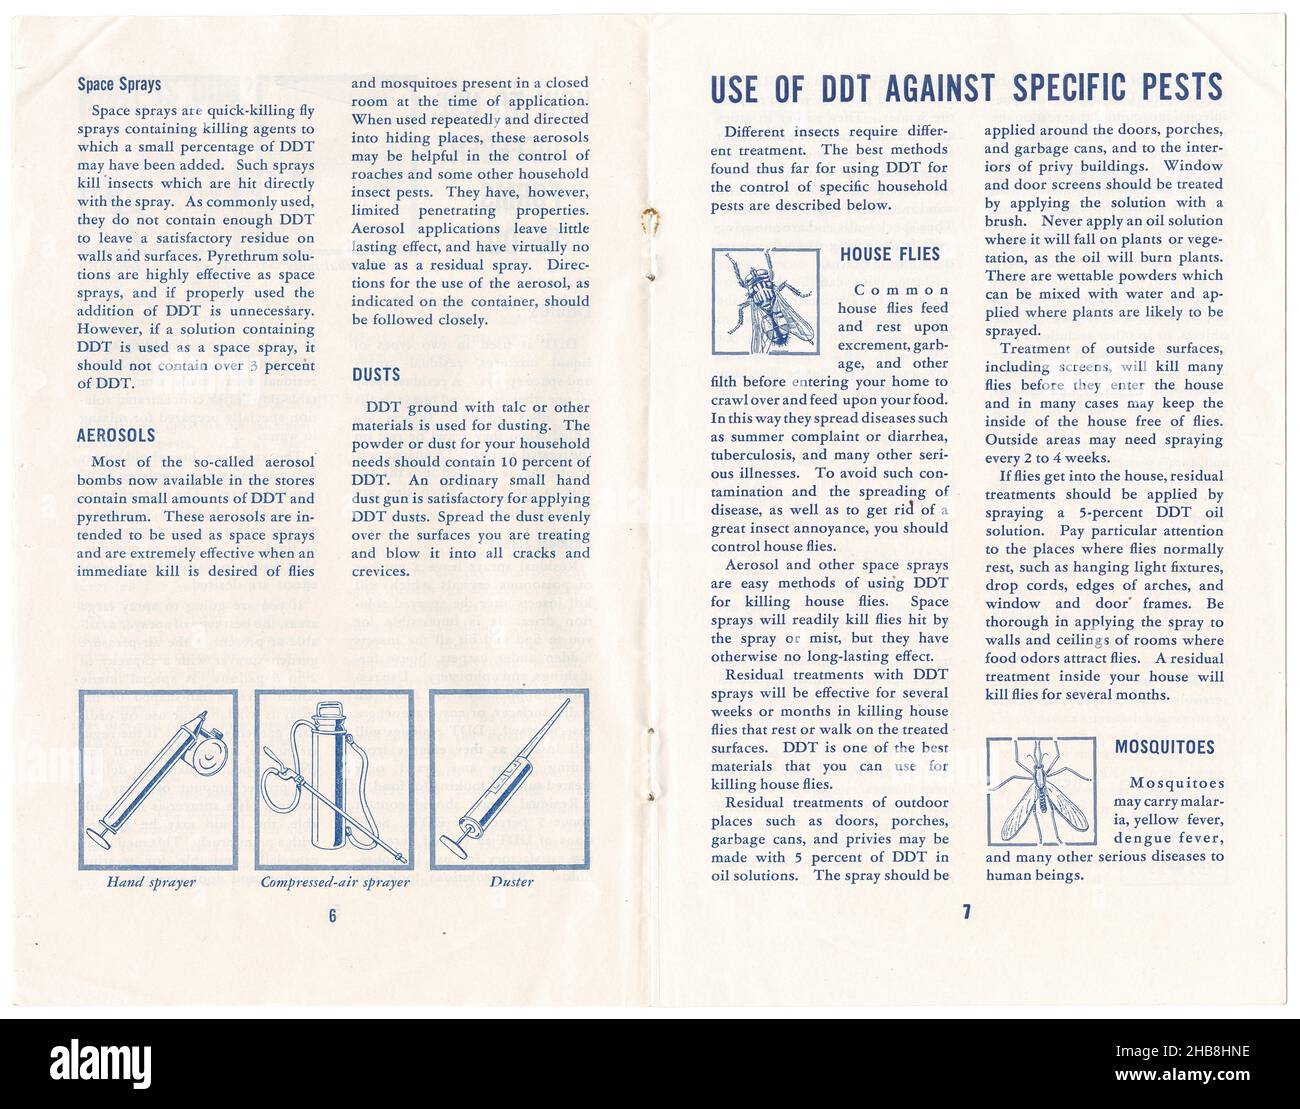 Interior spread from thew March 1947 booklet, DDT for the Control of Household Pests, prepared by the Bureau of Entomology and Plant Quarantine, Agricultural Research Administration, United States Department of Agriculture, and the United States Public Health Service Federal Security Agency. Stock Photo